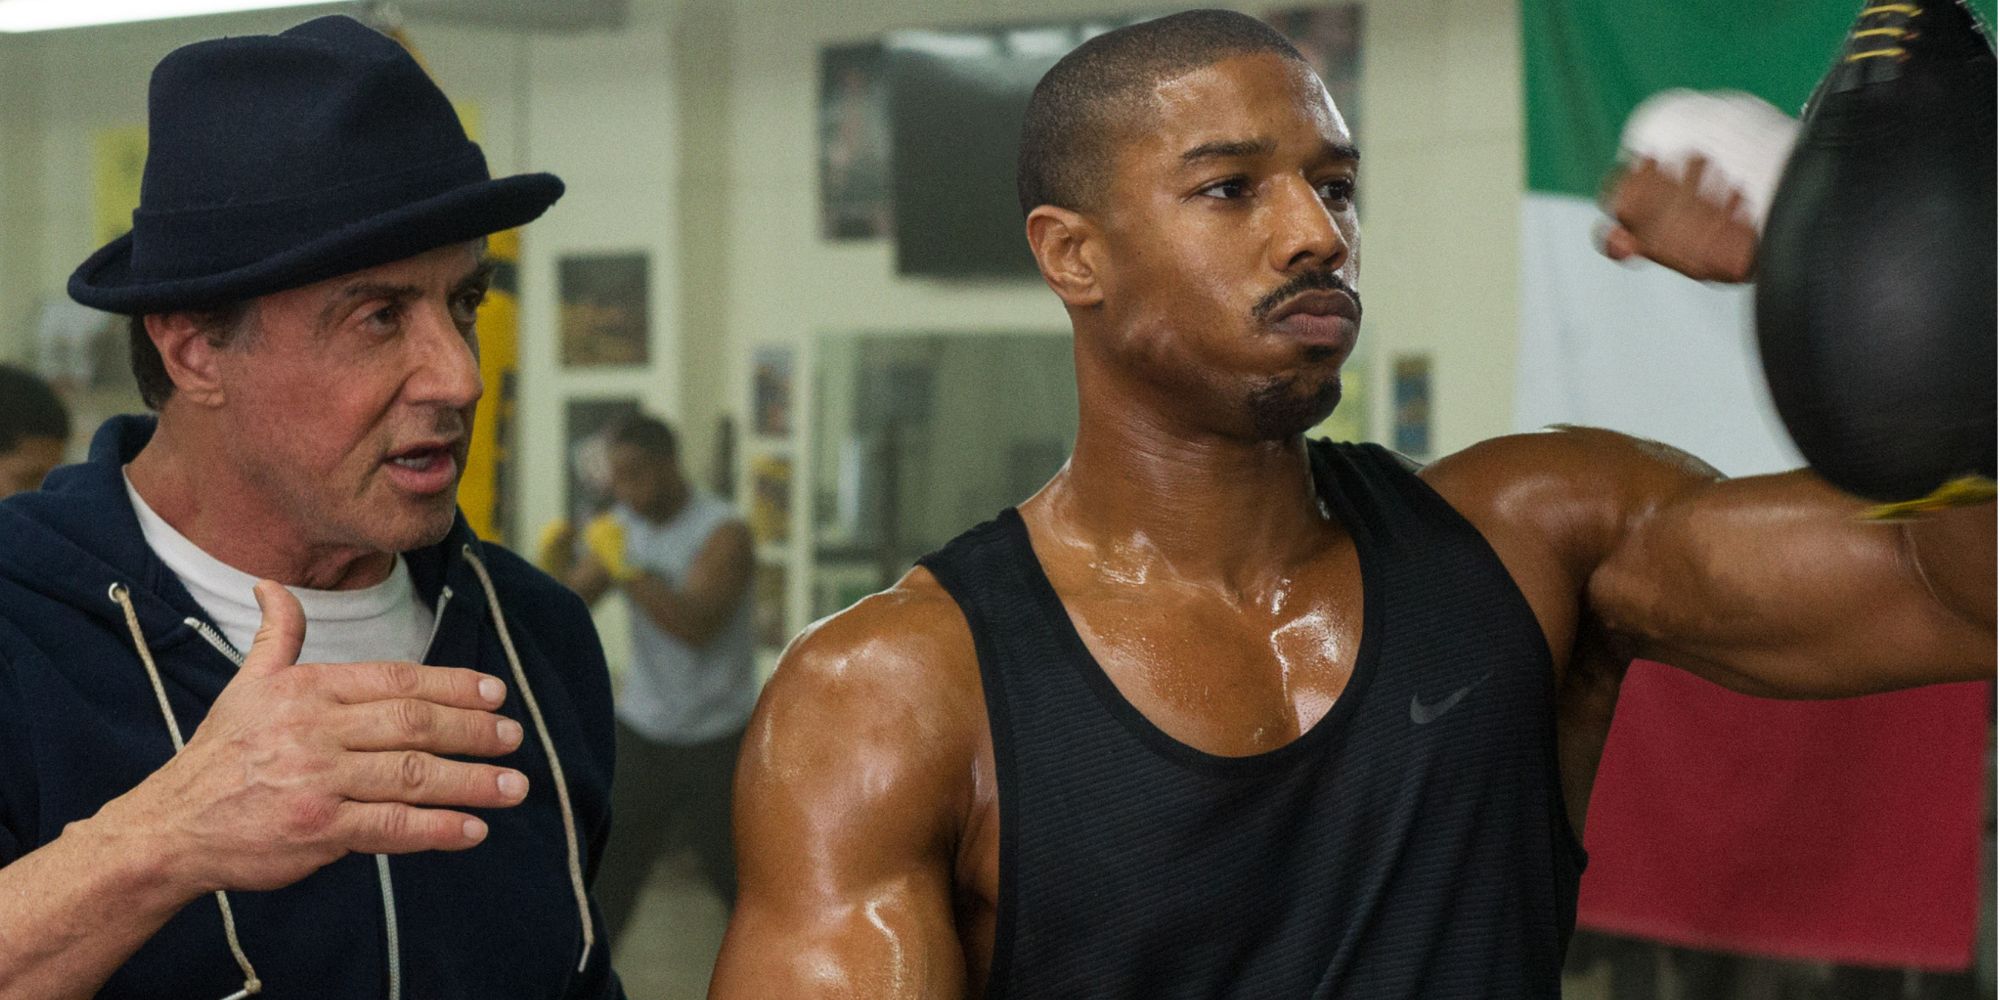 Rocky Balboa helps train Adonis in Creed